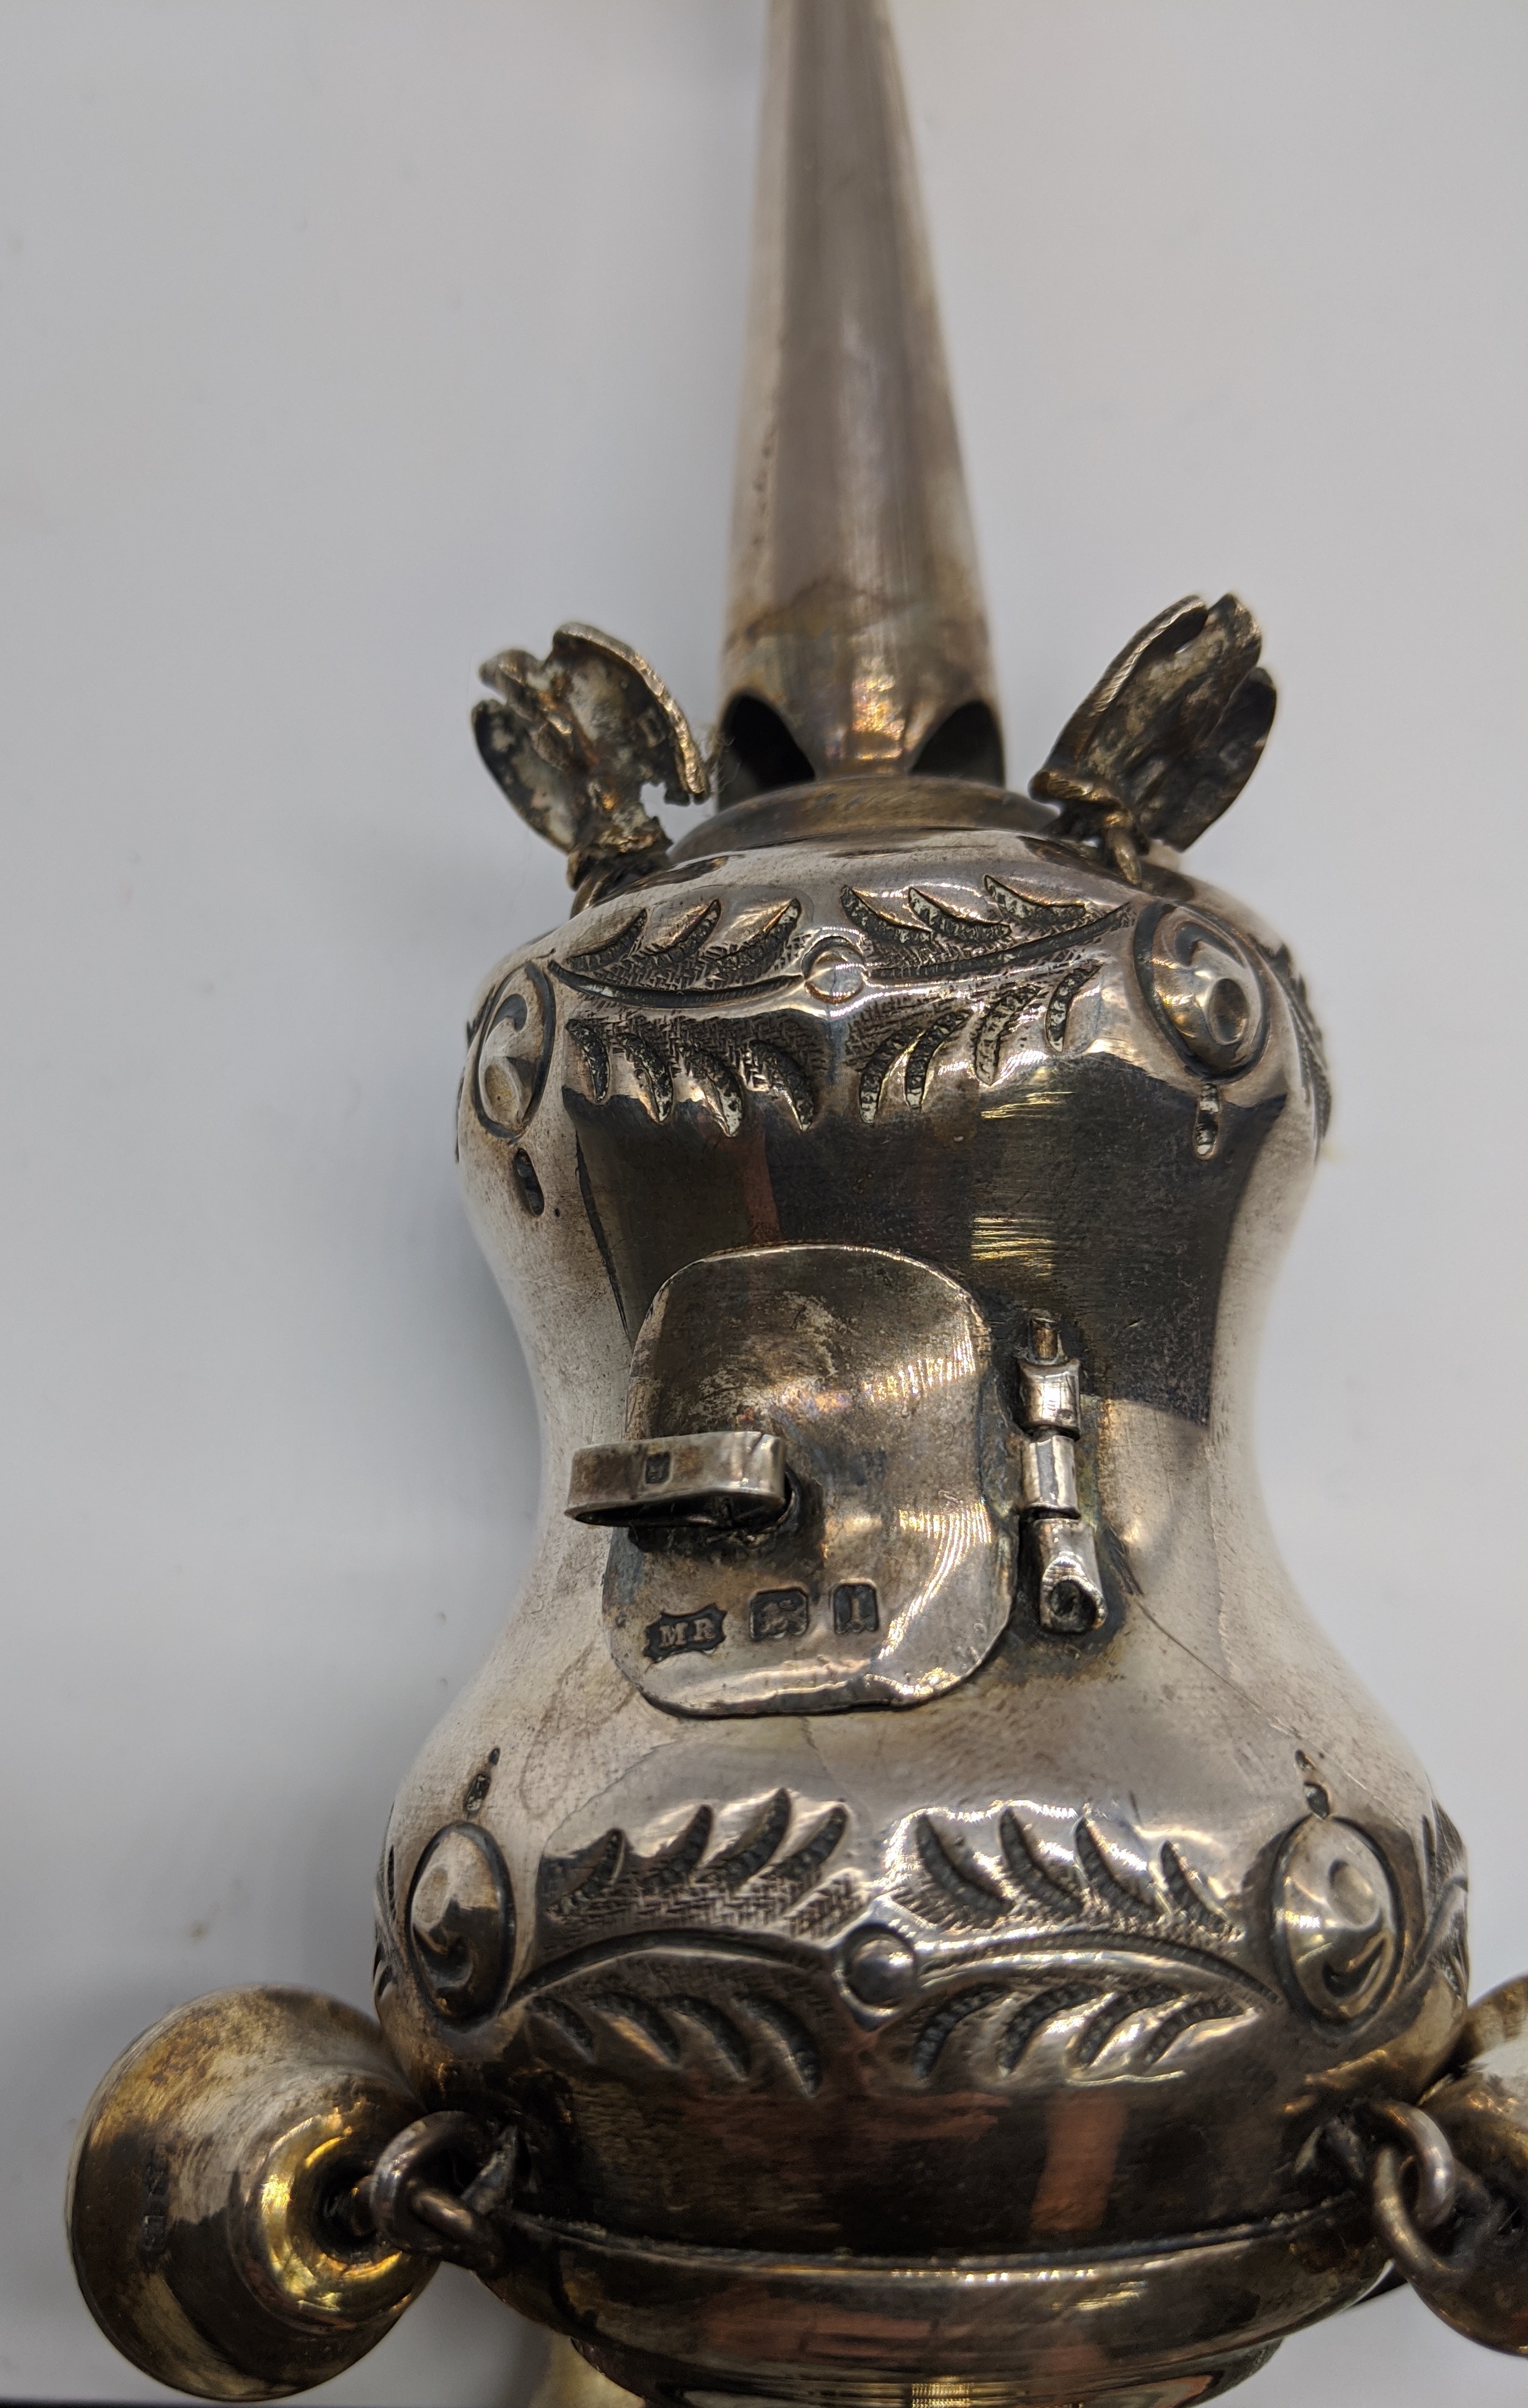 A silver Havdalah spice tower, hallmarked to bells, base and door, London 1906, maker Mosche - Image 5 of 5